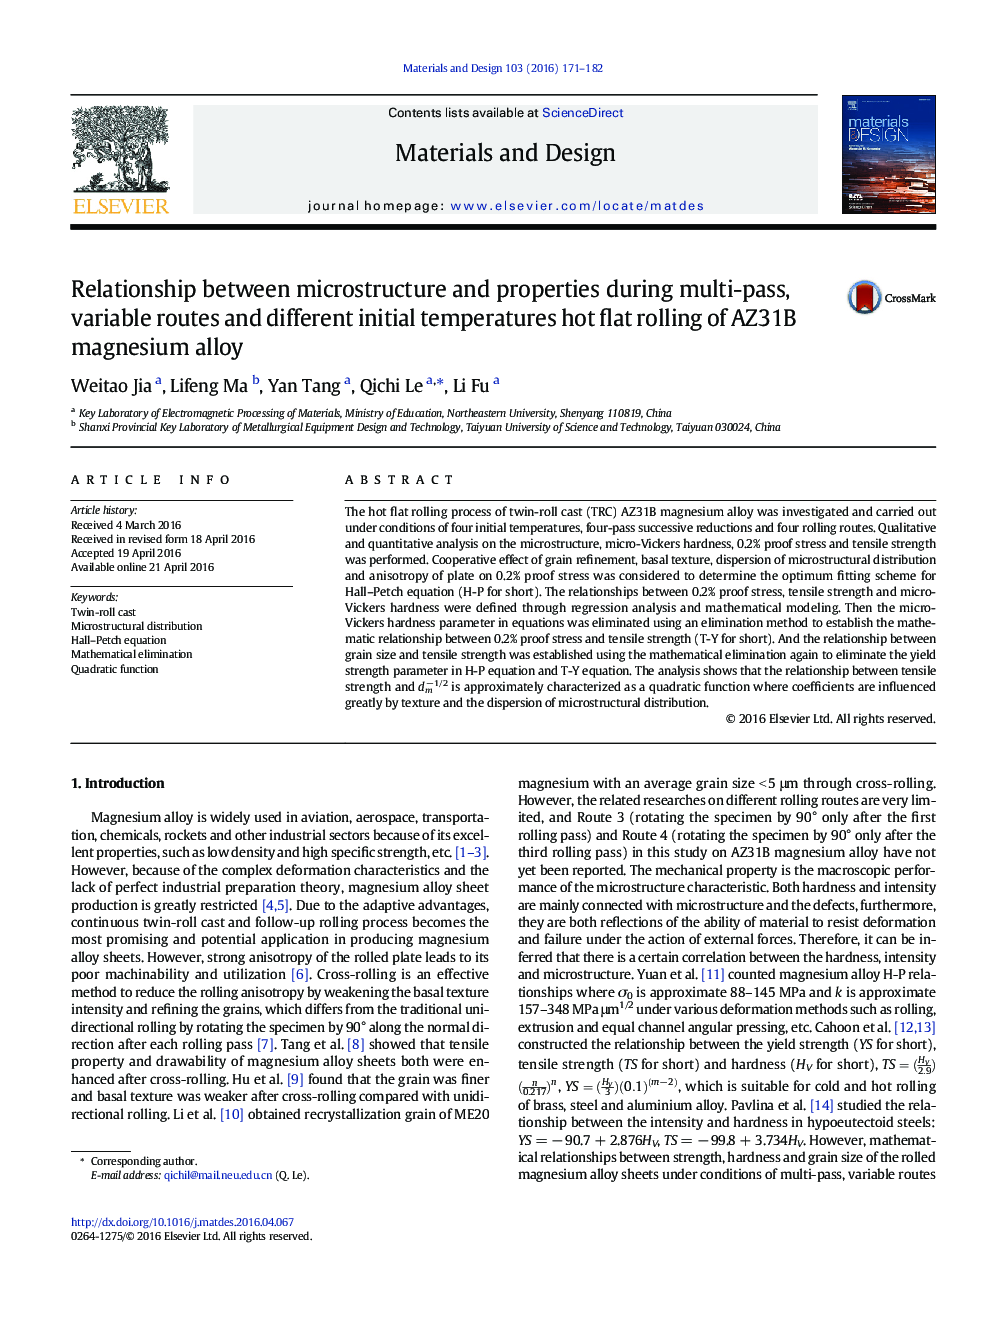 Relationship between microstructure and properties during multi-pass, variable routes and different initial temperatures hot flat rolling of AZ31B magnesium alloy